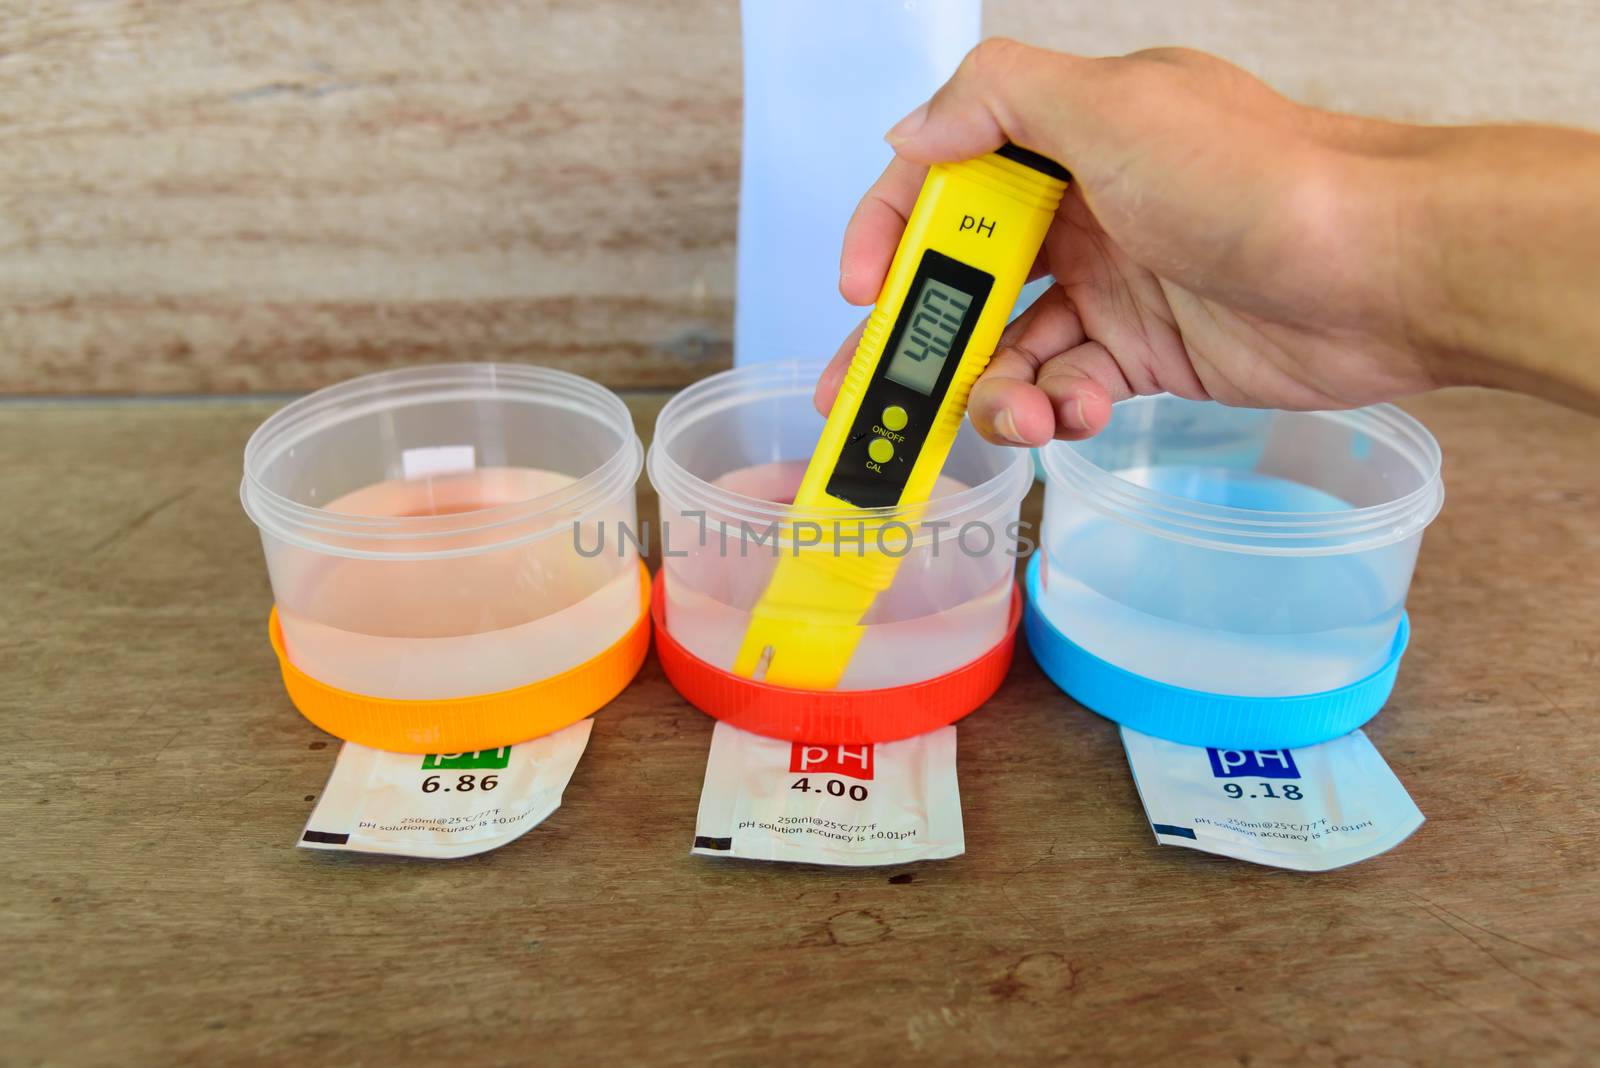 The man calibrate Ph meter before use it for tester